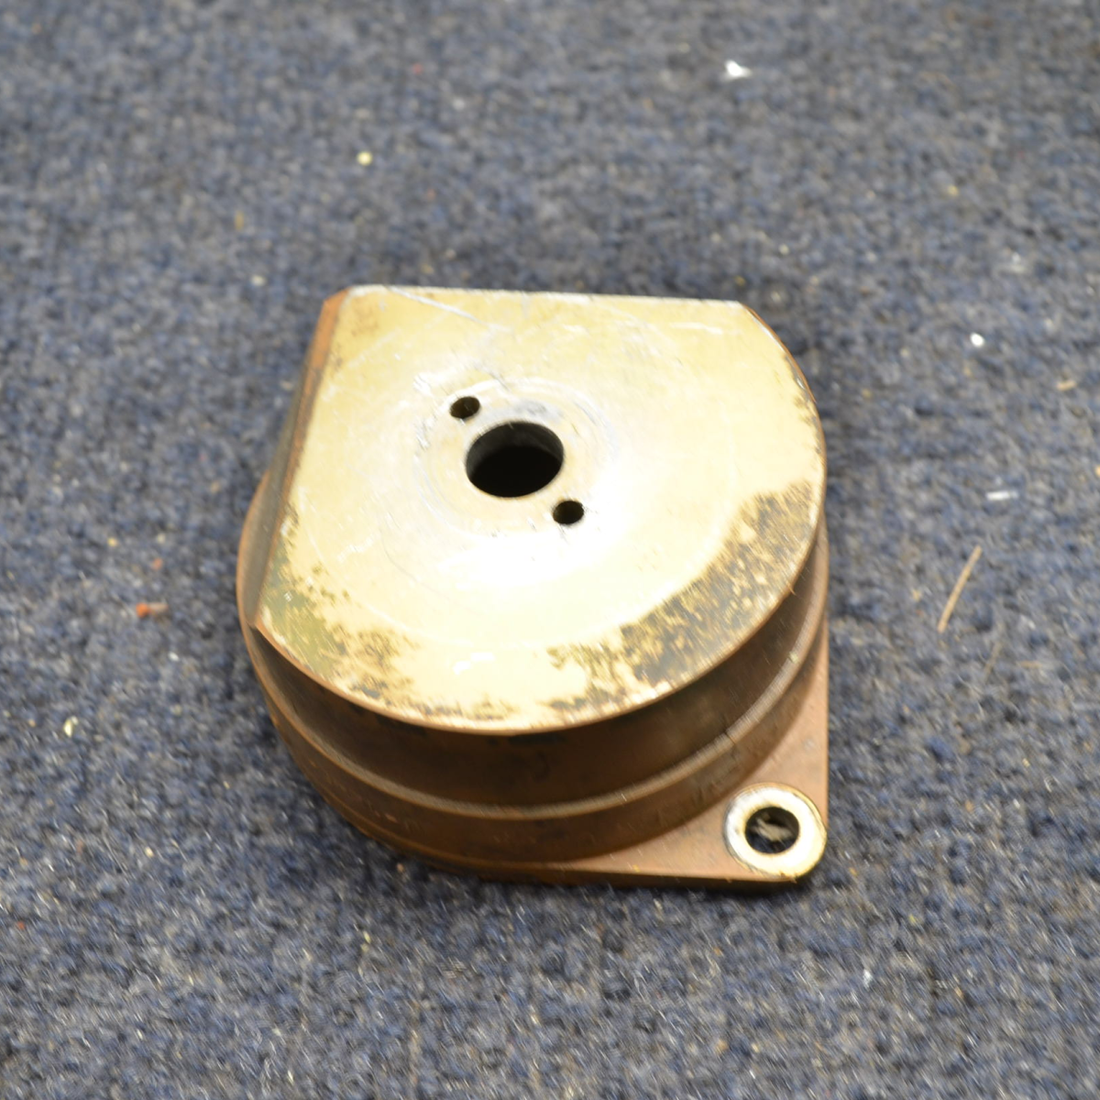 Used aircraft parts for sale, J-124540-1 Lord  [part_model] Cessna 210 LORD ENGINE SHOCK MOUNT PRICE PER EACH